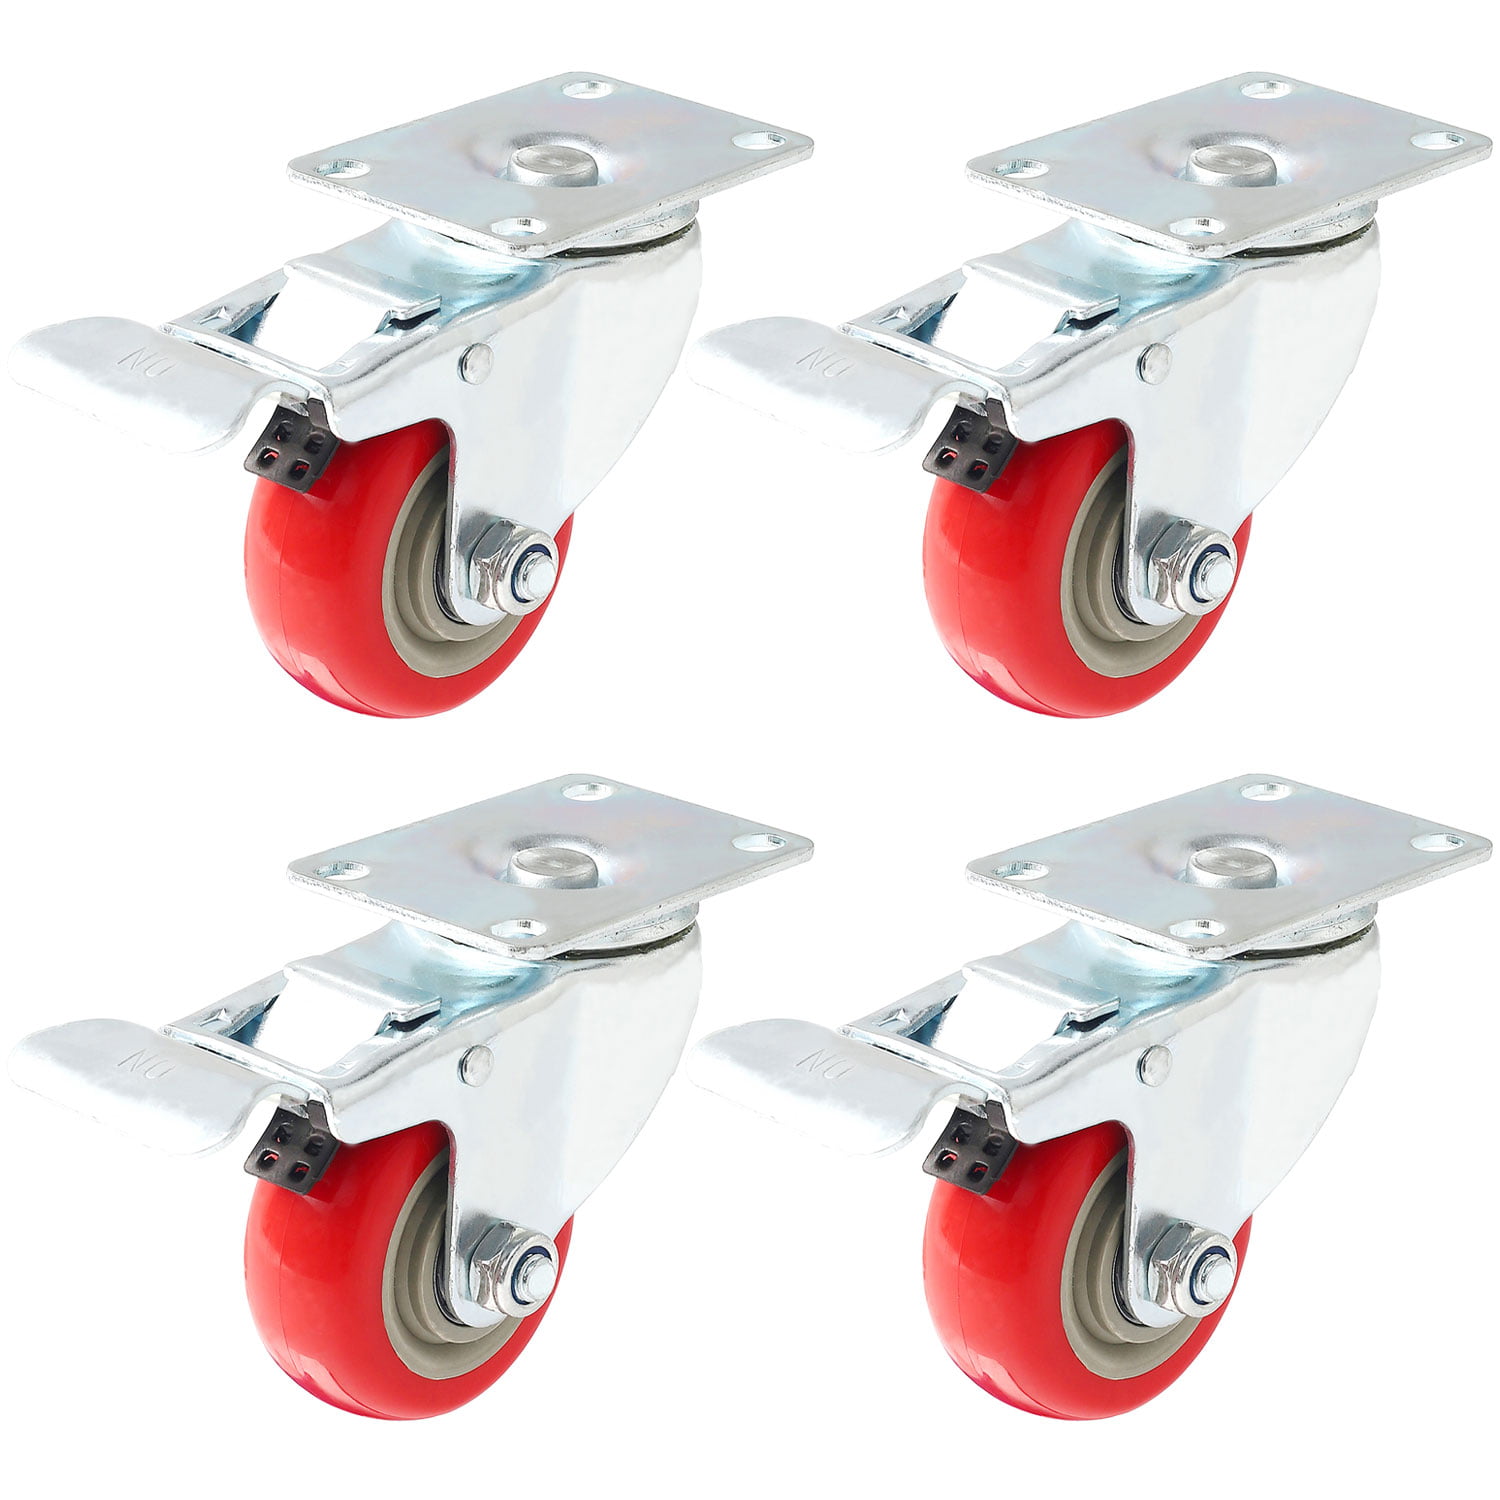 1.5 Inch Caster Wheels 4 Pack Safety No Noise and Protect Floor from Scratches TPE Rubber Caster with 360 Degree Top Plate and Break Brake 192LB of Total Capacity for Furniture Plate Castors 